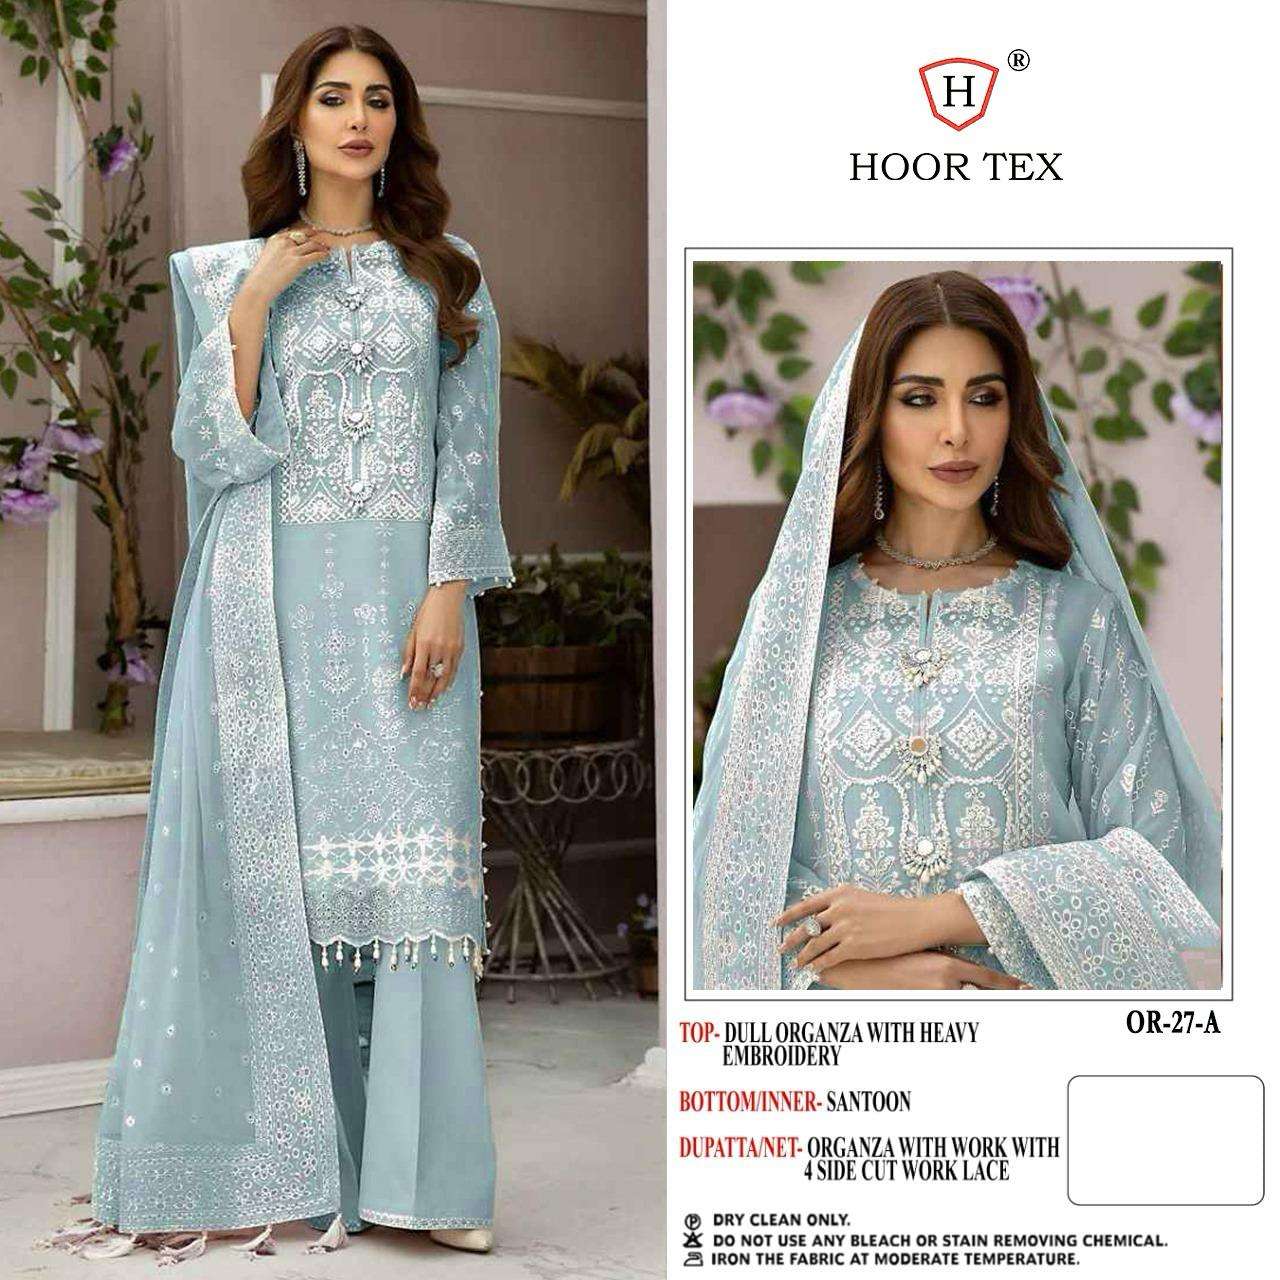 OR-27 COLOURS BY HOOR TEX DESIGNER ORGANZA EMBROIDERED PAKISTANI DRESSES